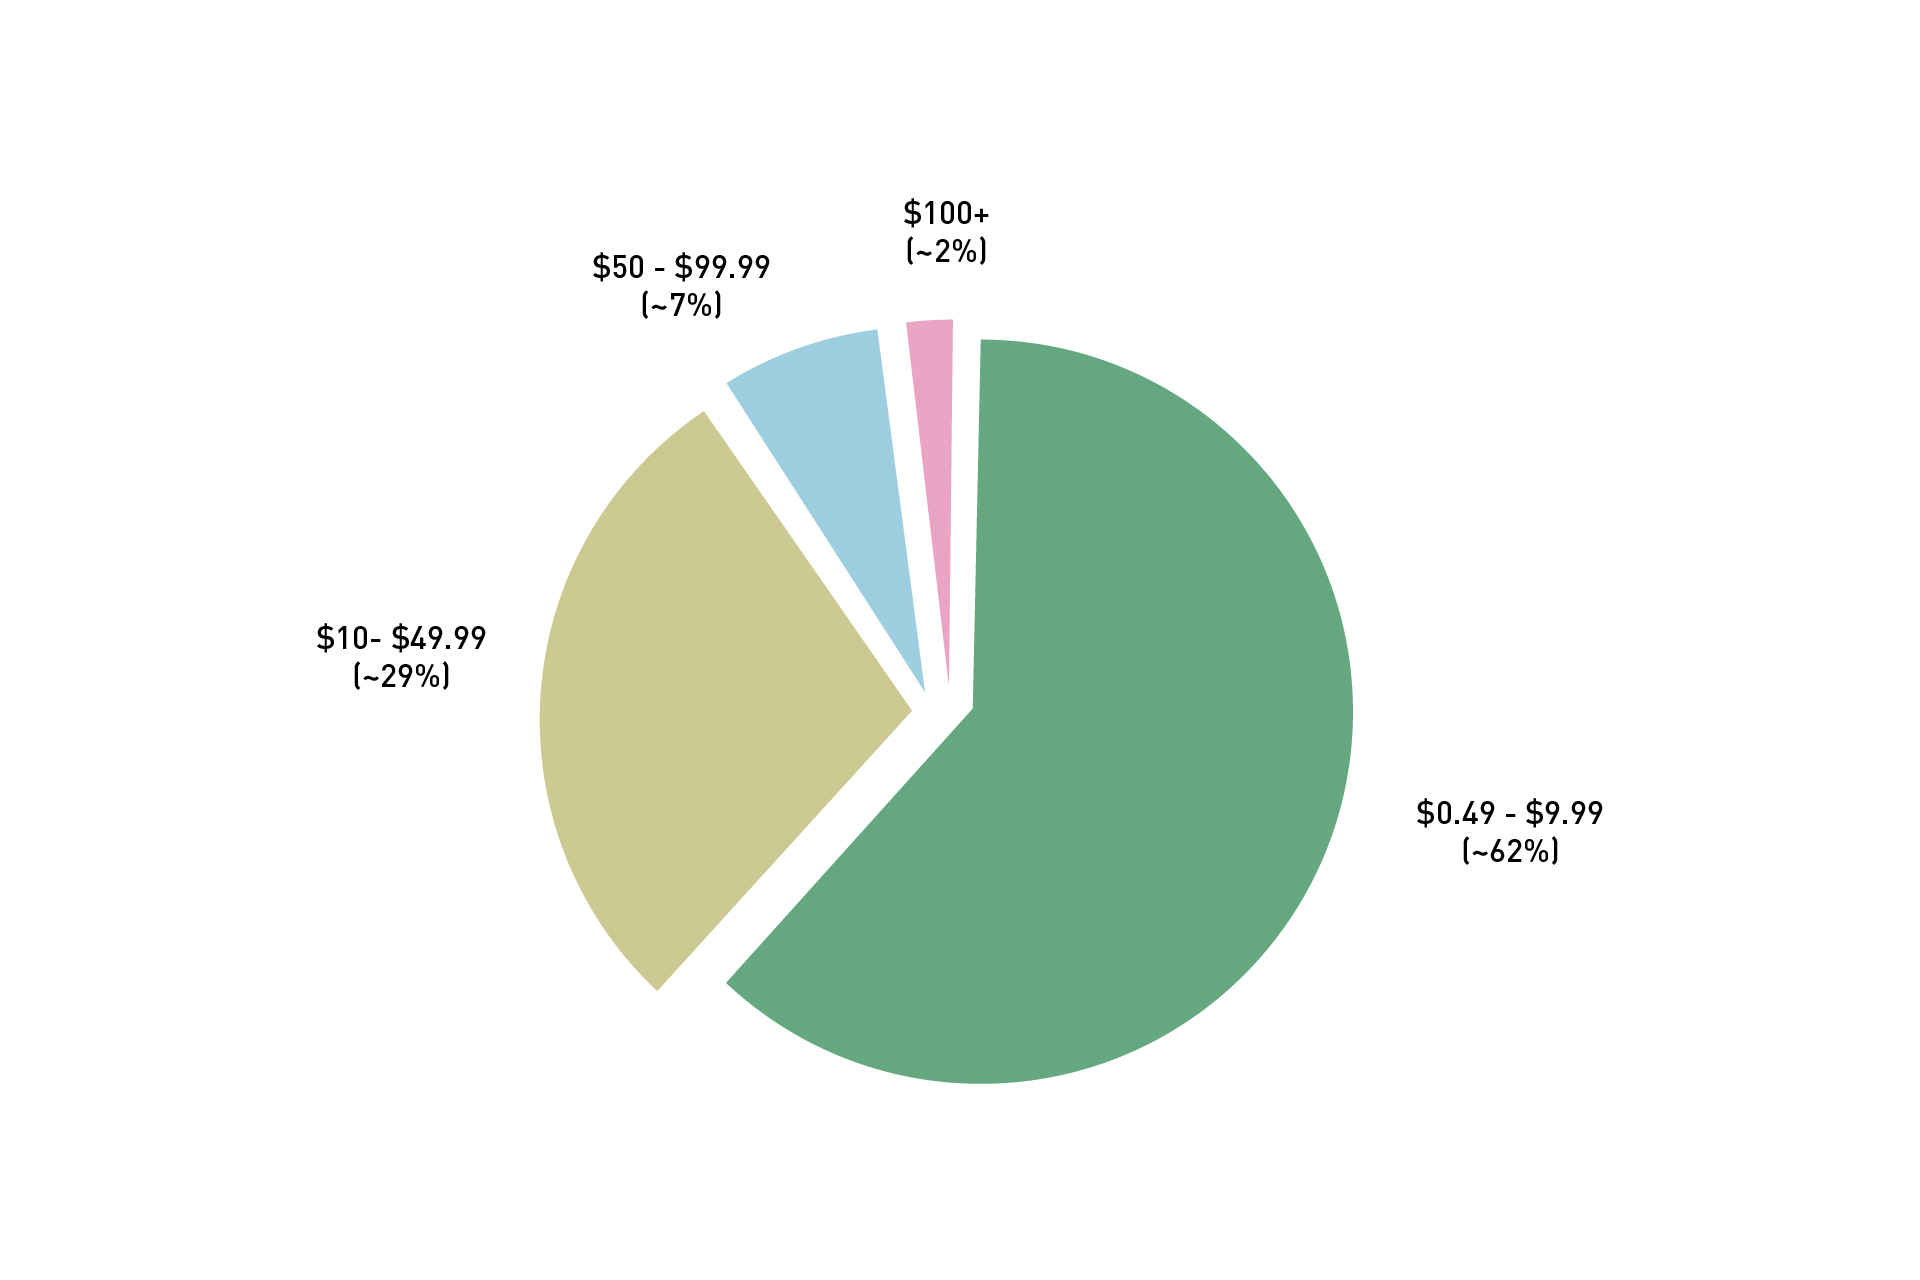 A pie chart of the breakdown of average costs of In-App Purchases. The details are described below.